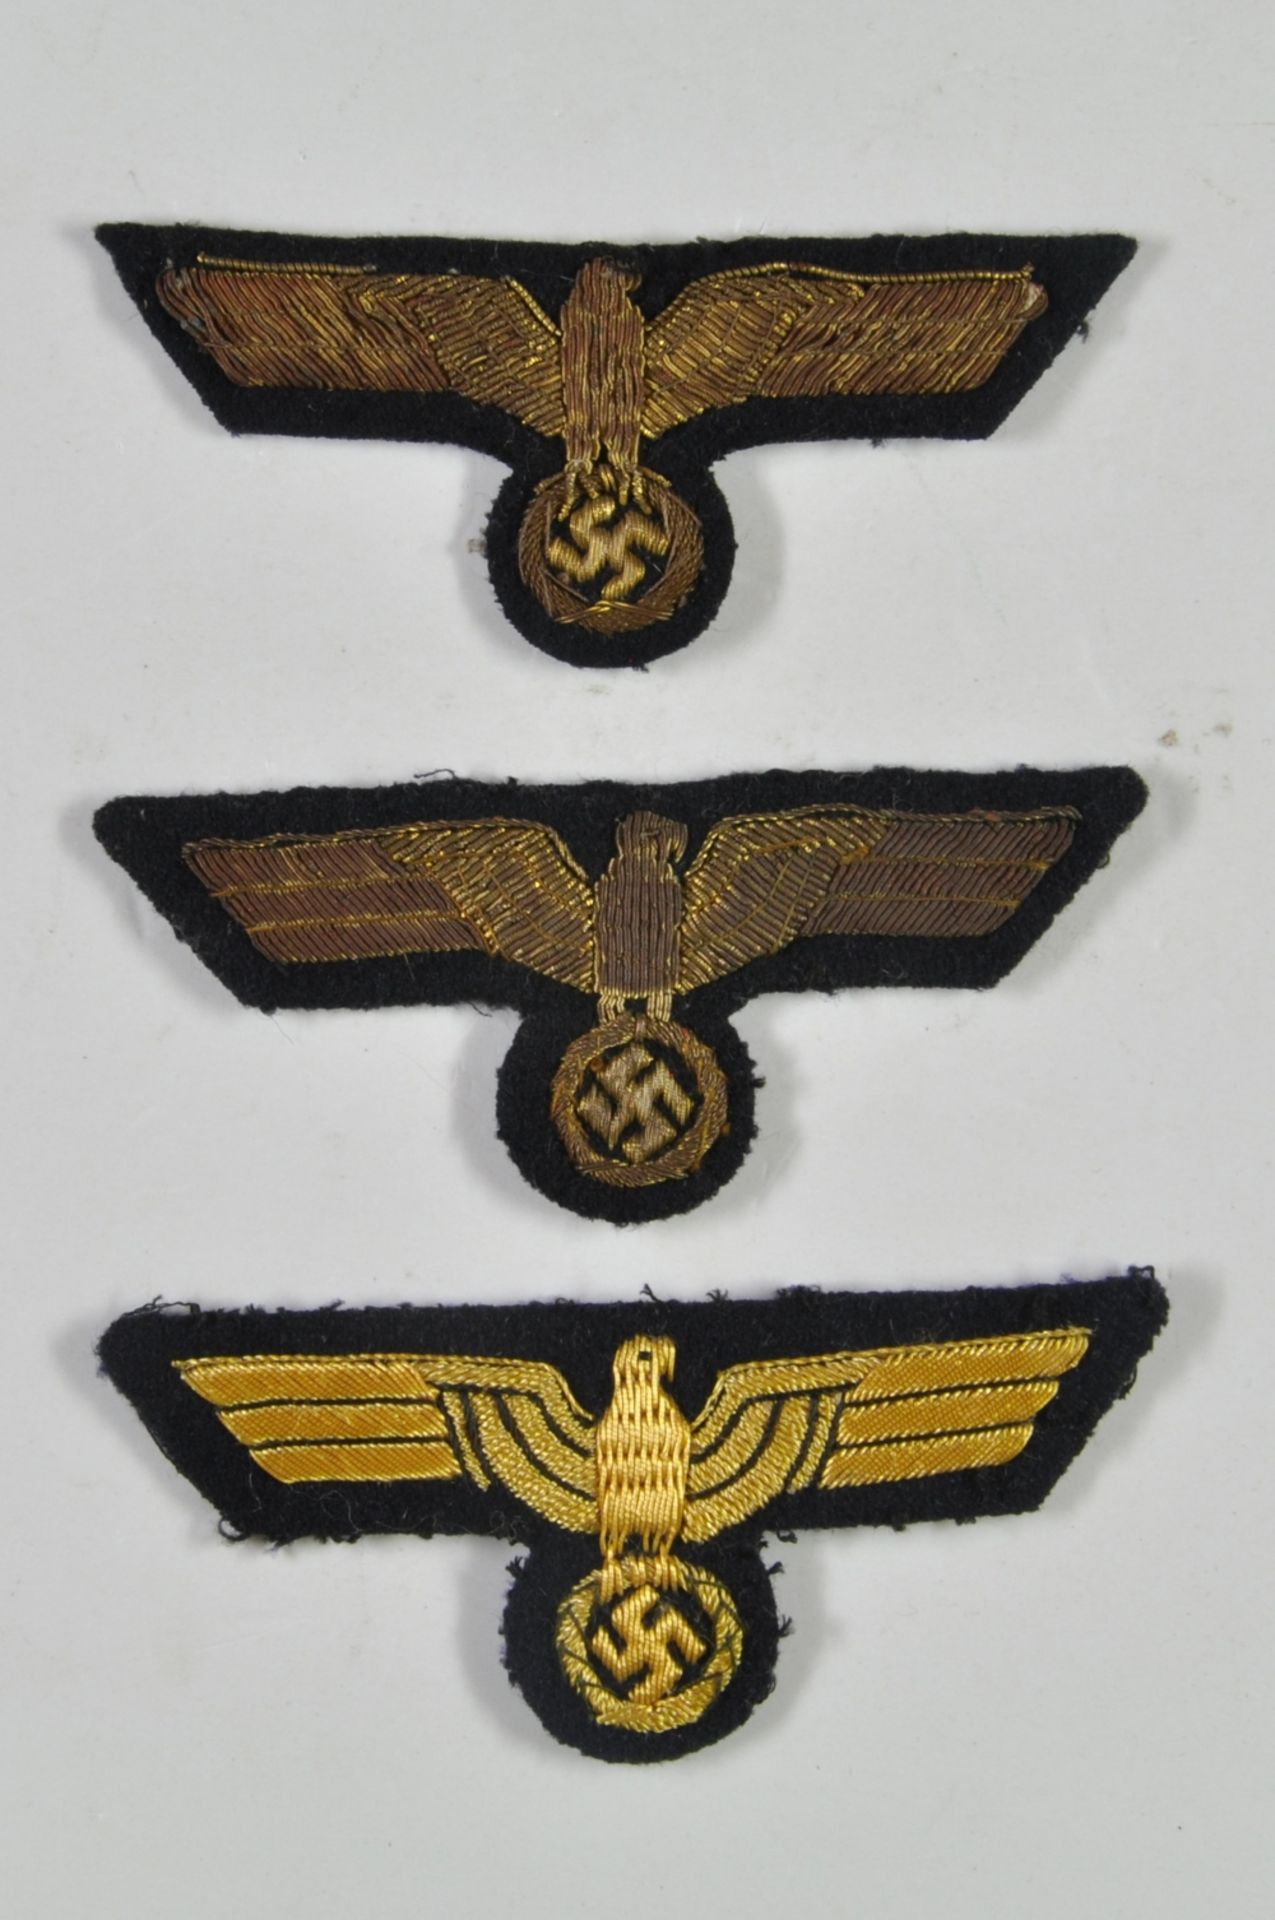 3 x breast eagle for officers, on dark blue fabric, 2 x on the reverse side with paper cover,